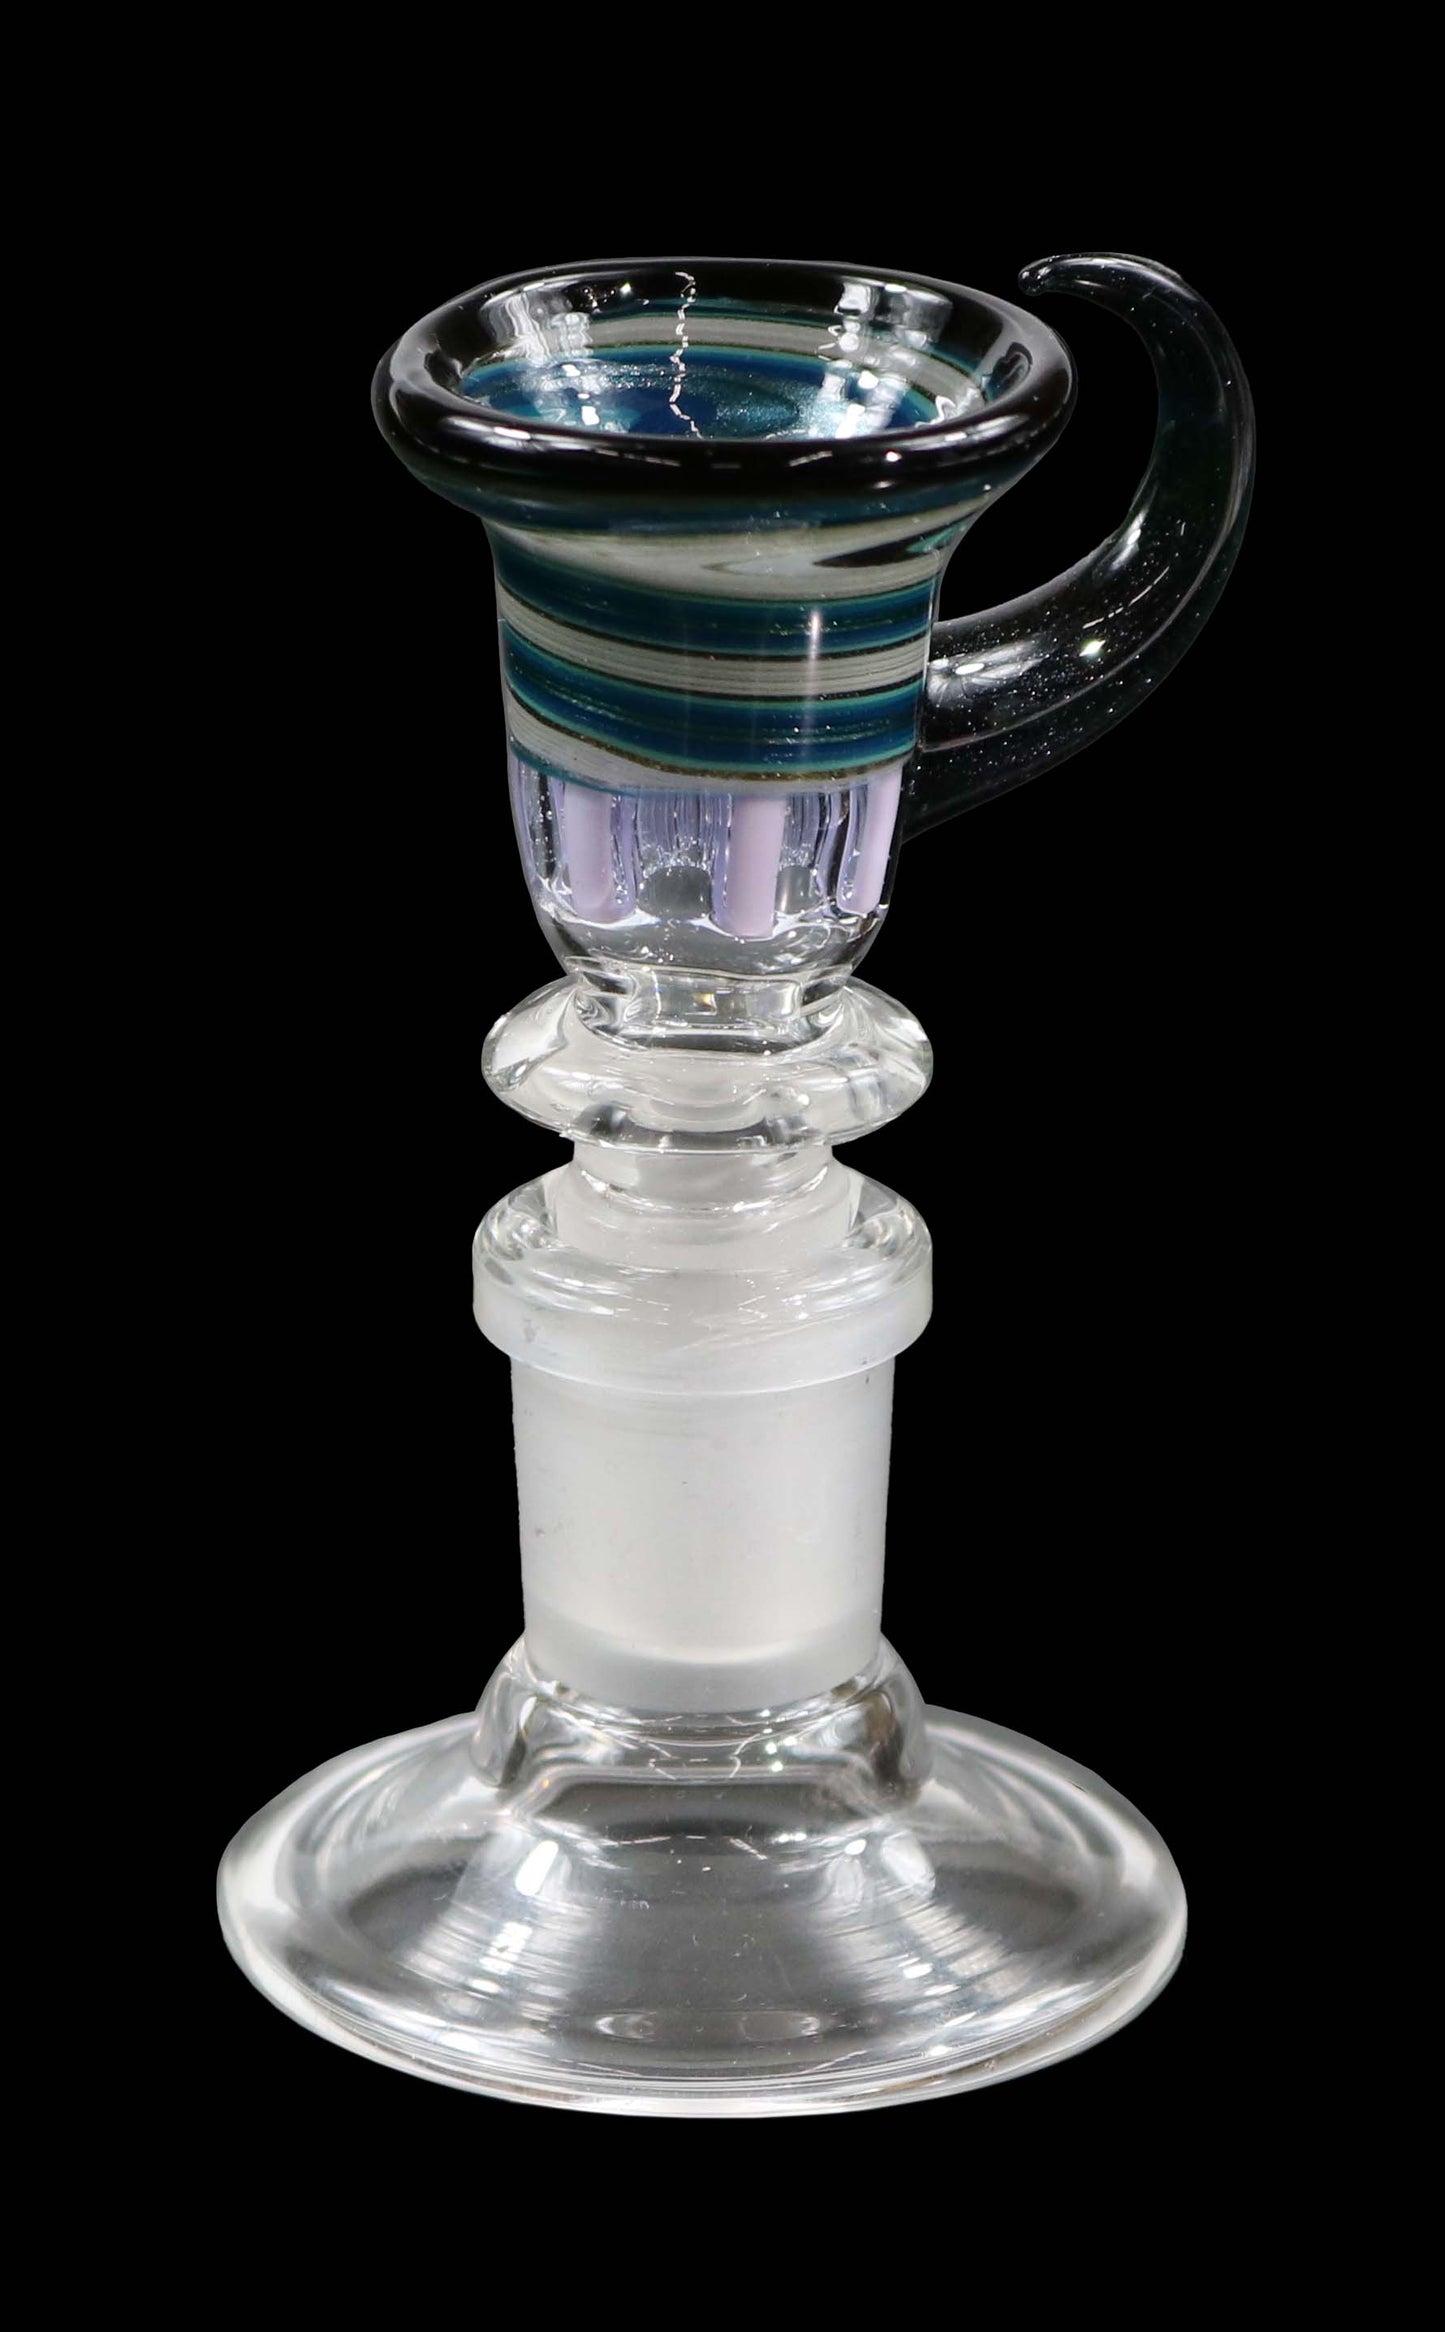 14mm Martini Bong Slide with built in screen from Glass by Slick - Blue/Green/Black